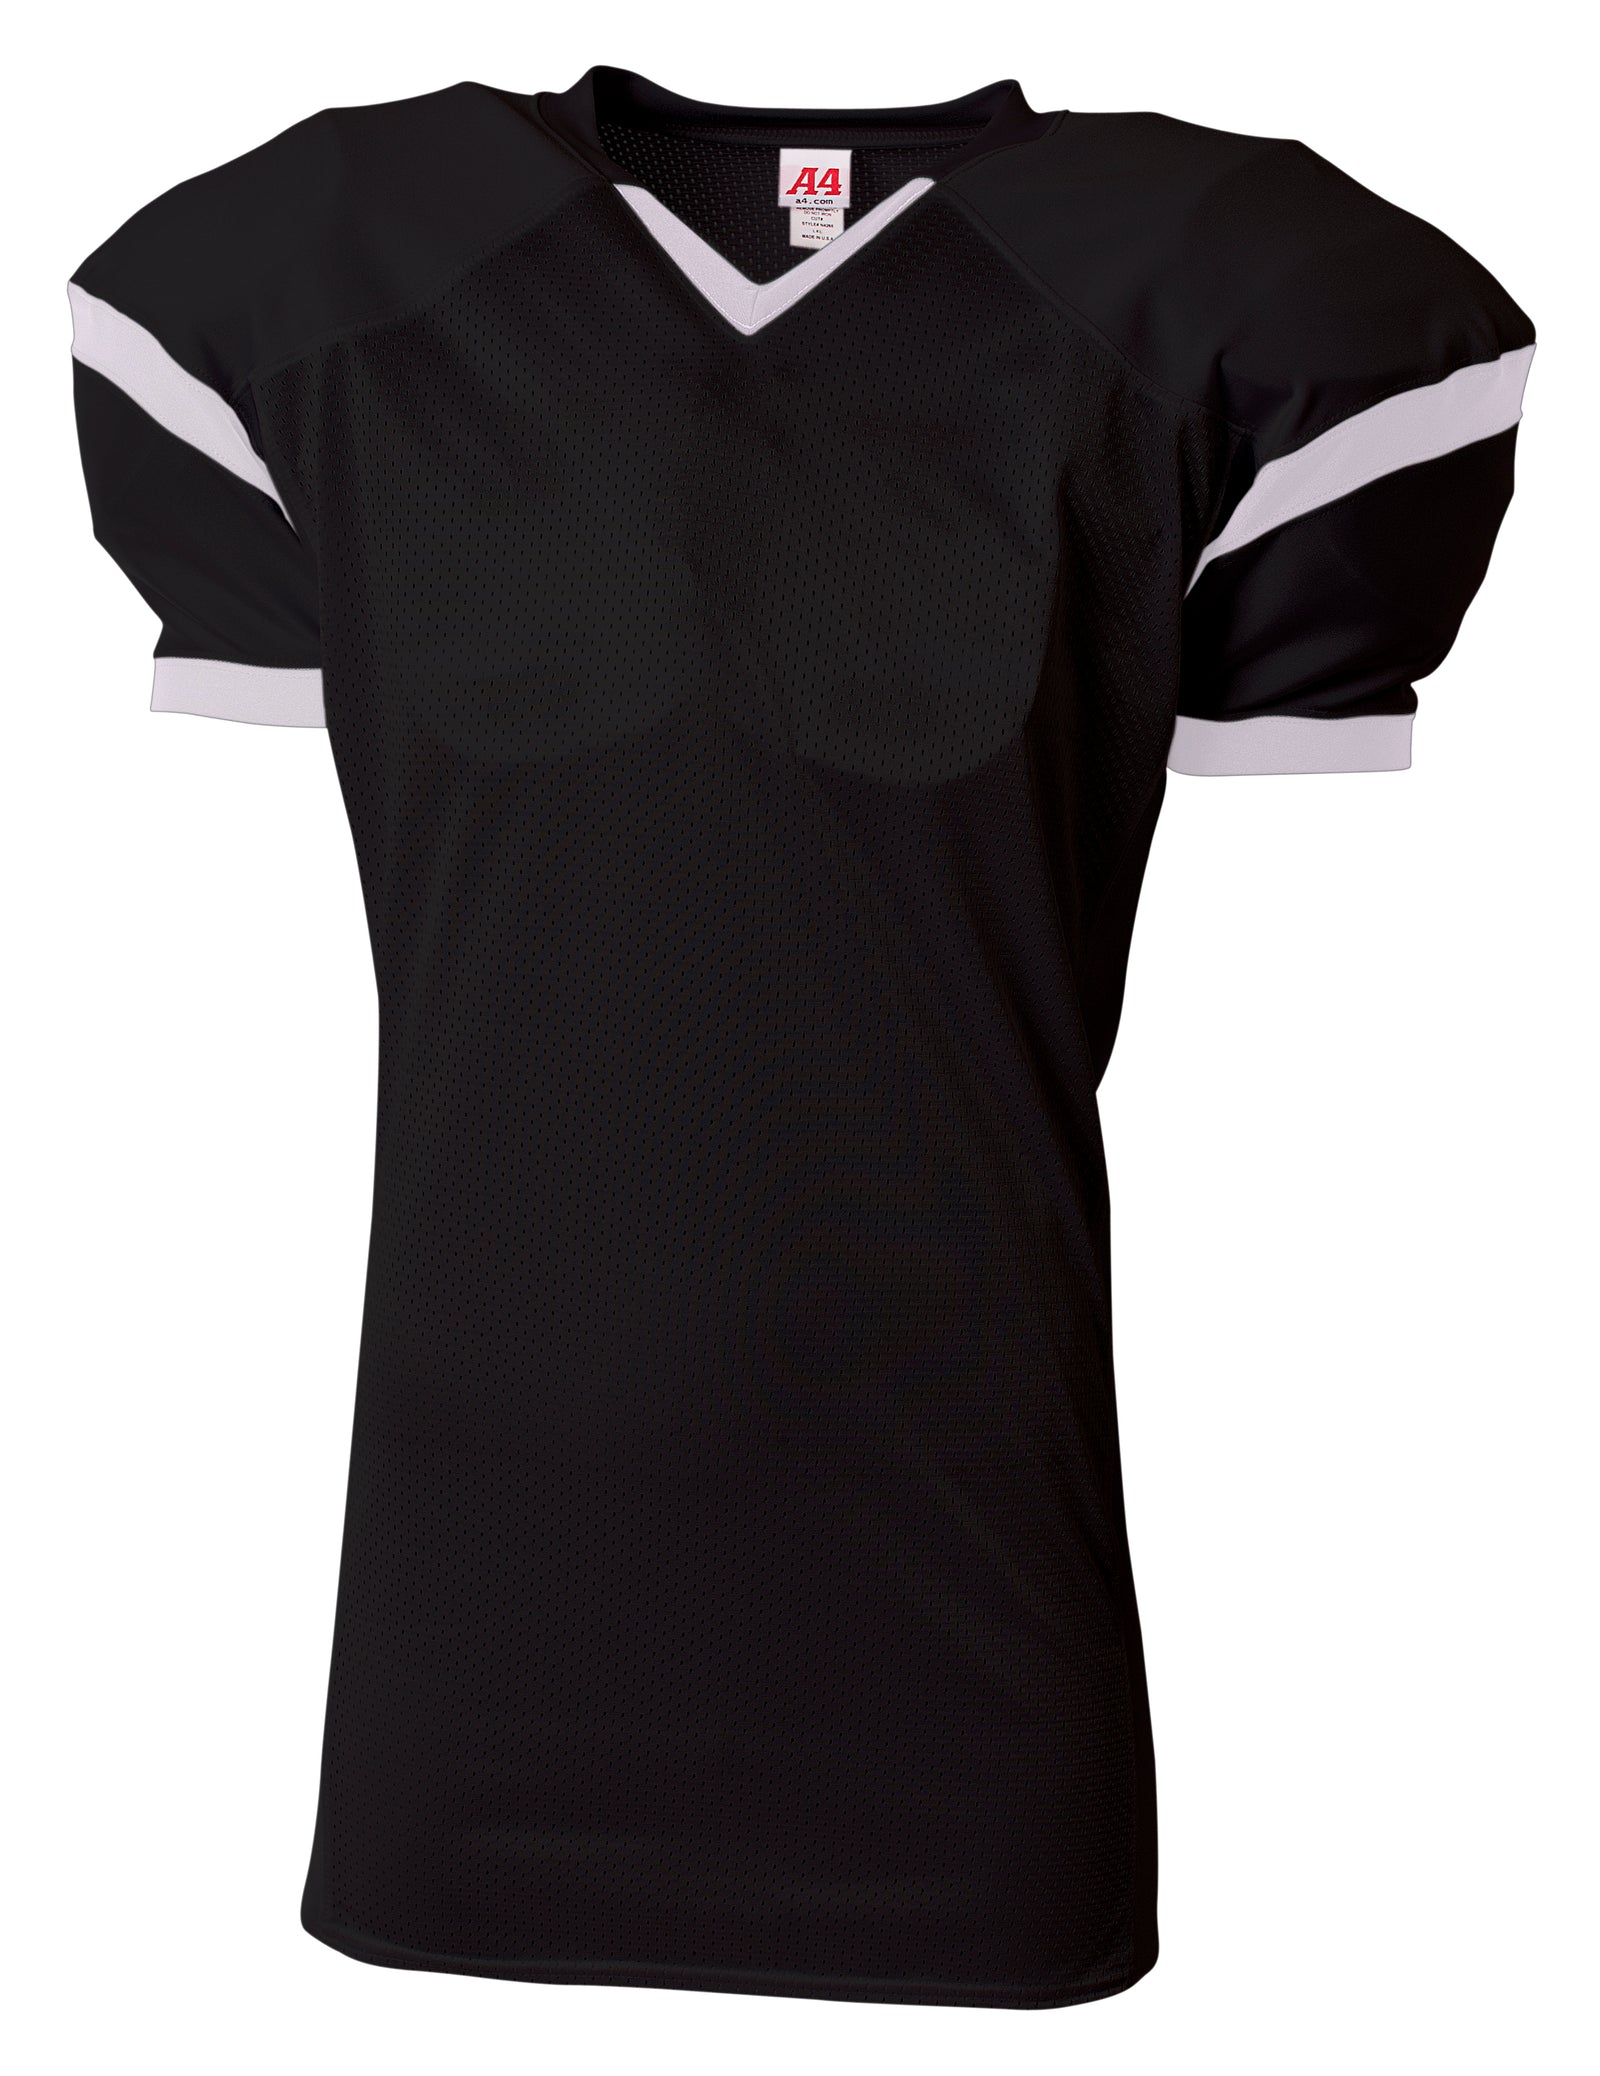 Black/white A4 A4 Rollout Football Jersey